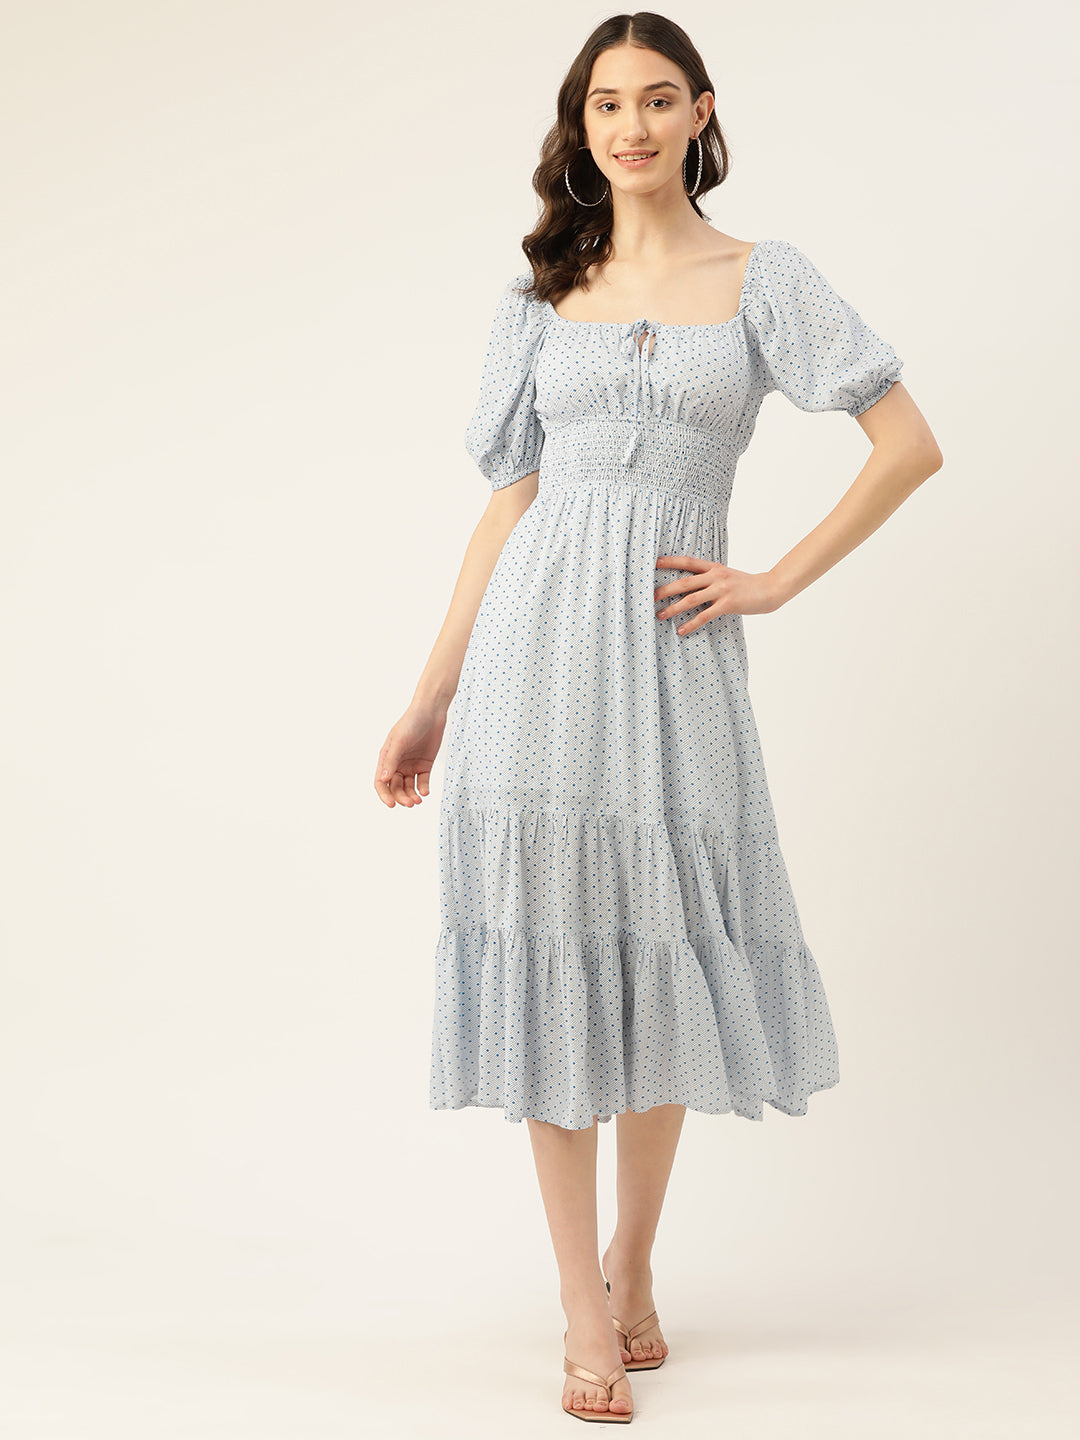 Rue Collection Smocked Tiered Fit & Flare Midi Dress